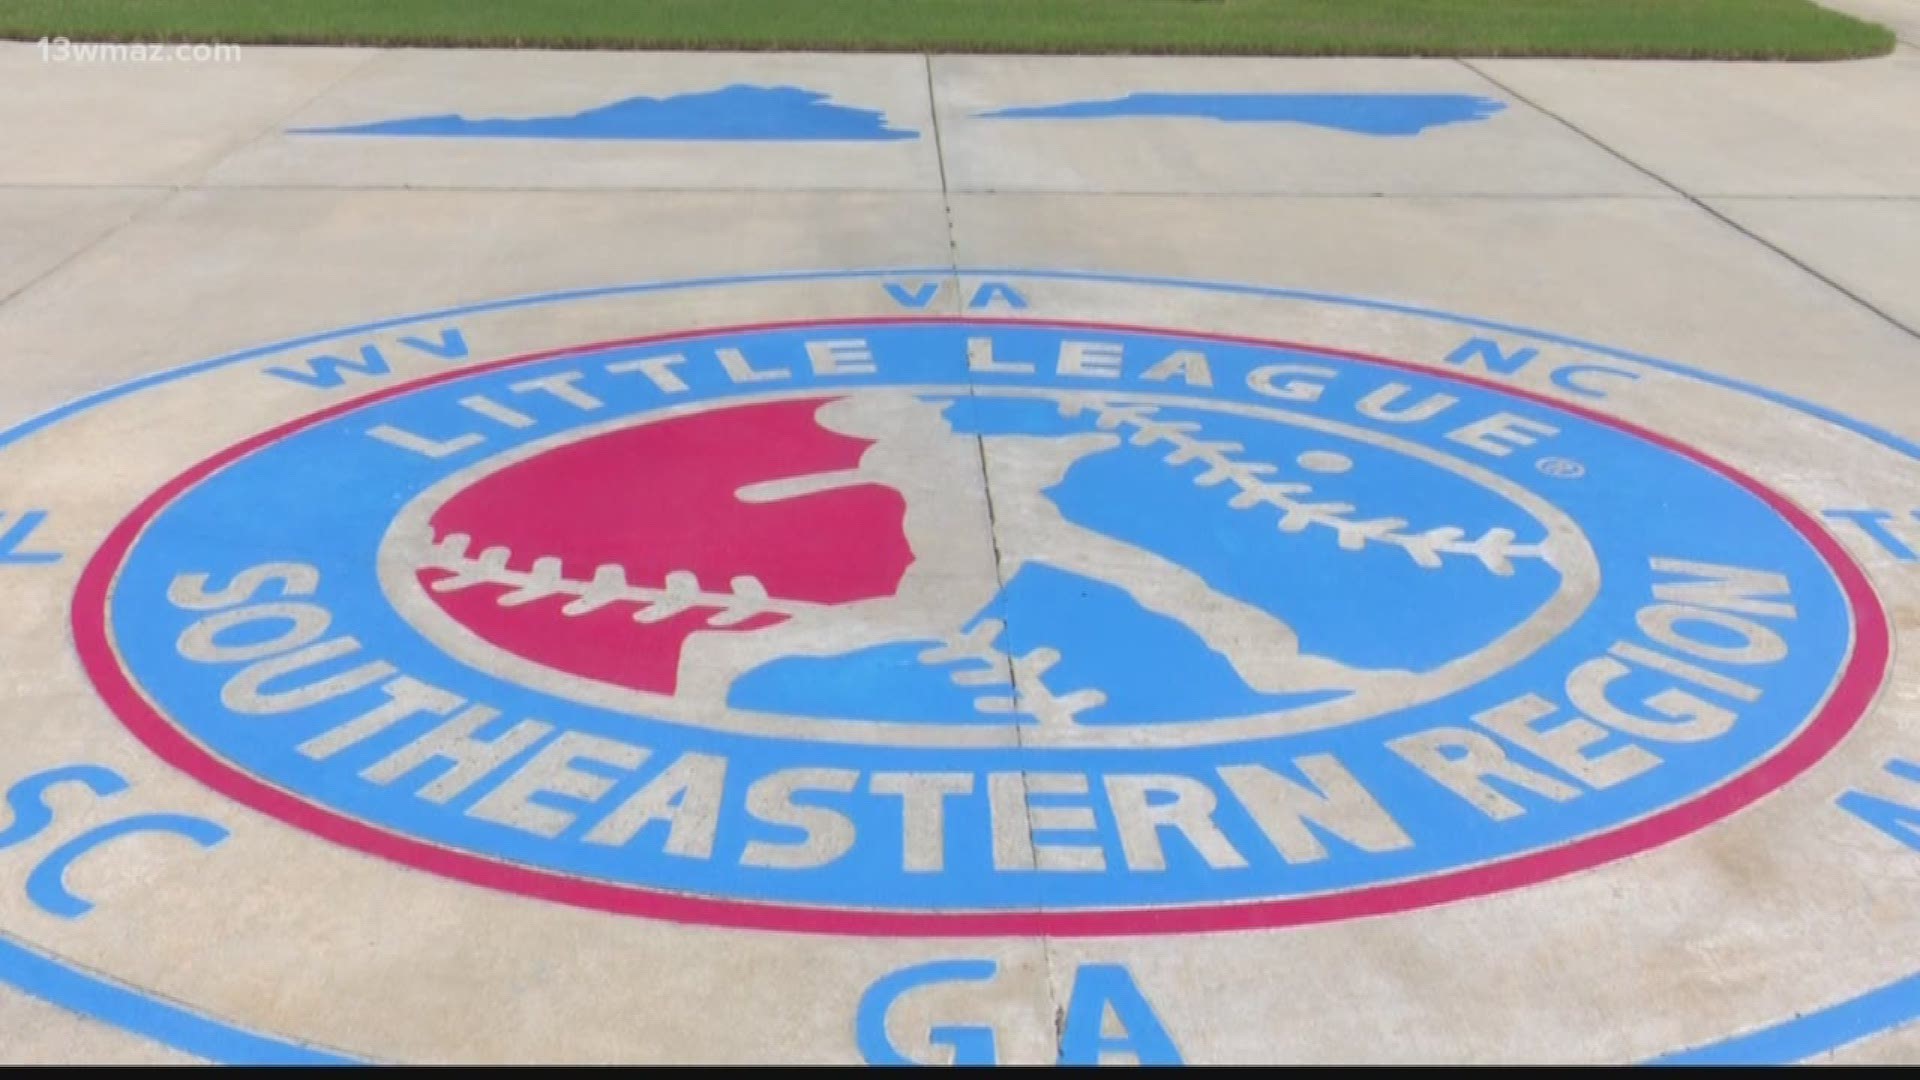 With summer weather in full swing, players, coaches, and families across the southeast are gearing up to play ball. As Sarah Hammond explains, they aren't the only ones who make next month's Little League Regional Tournament possible.